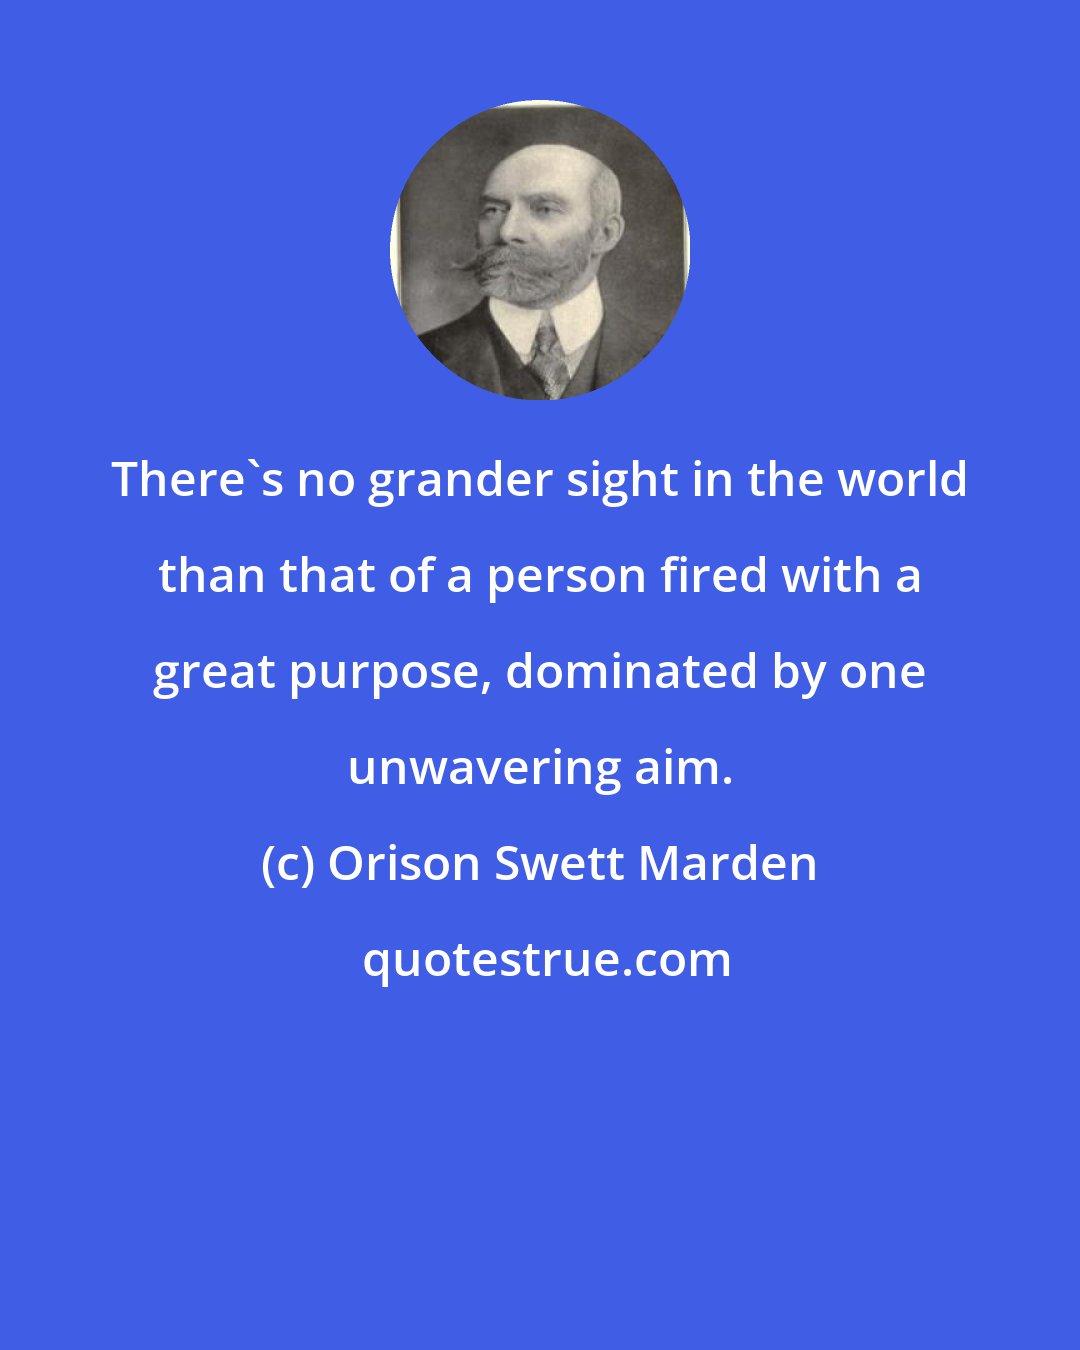 Orison Swett Marden: There's no grander sight in the world than that of a person fired with a great purpose, dominated by one unwavering aim.